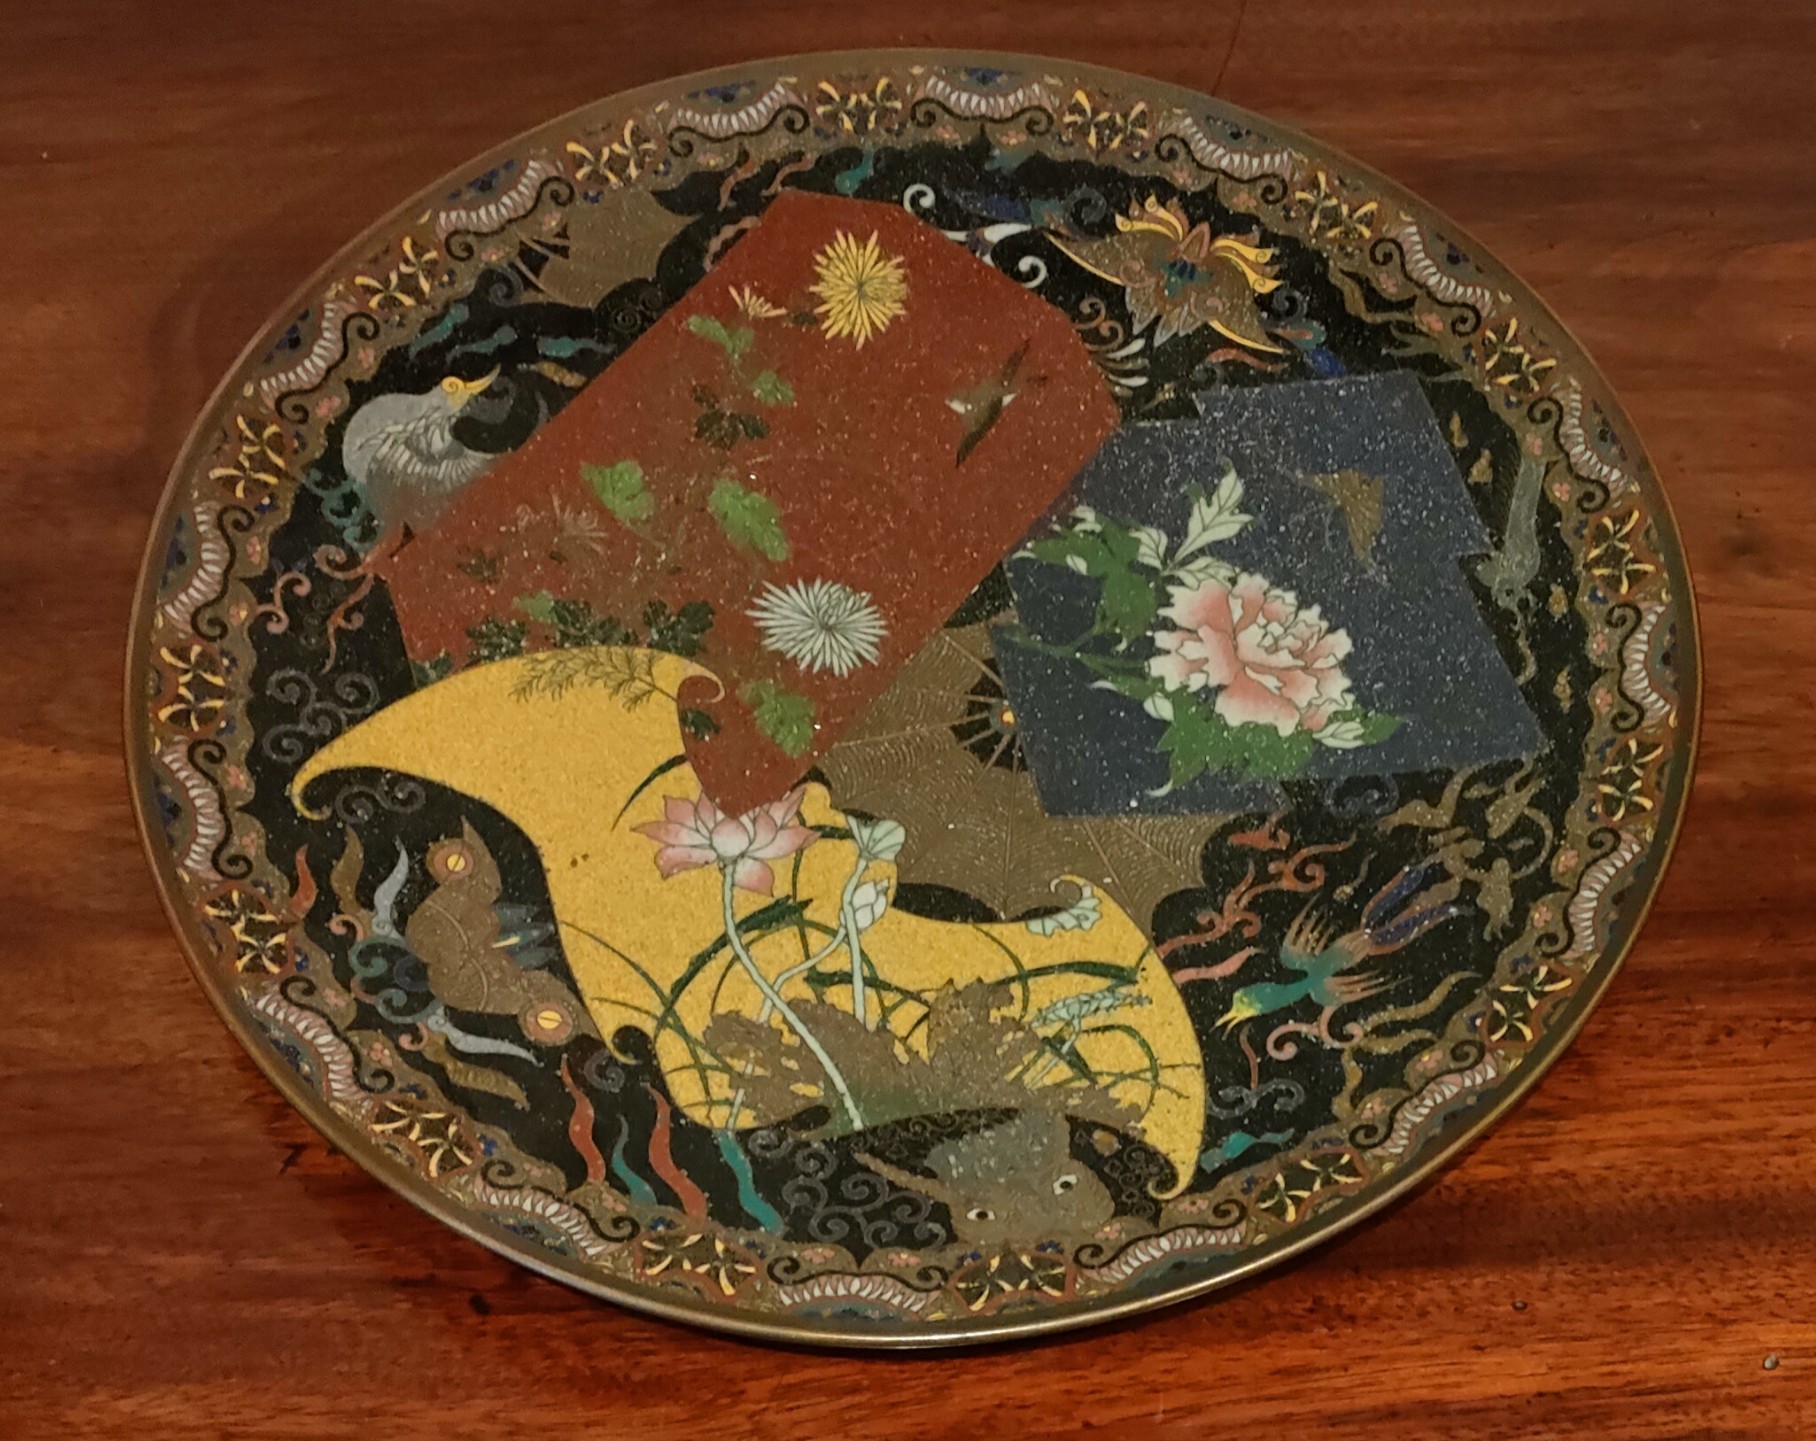 ORIENTAL CLOISONNE GLAZED CIRCULAR PLAQUE DECORATED WITH FOLIAGE AND BIRDS, DIAMETER APPROXIMATELY